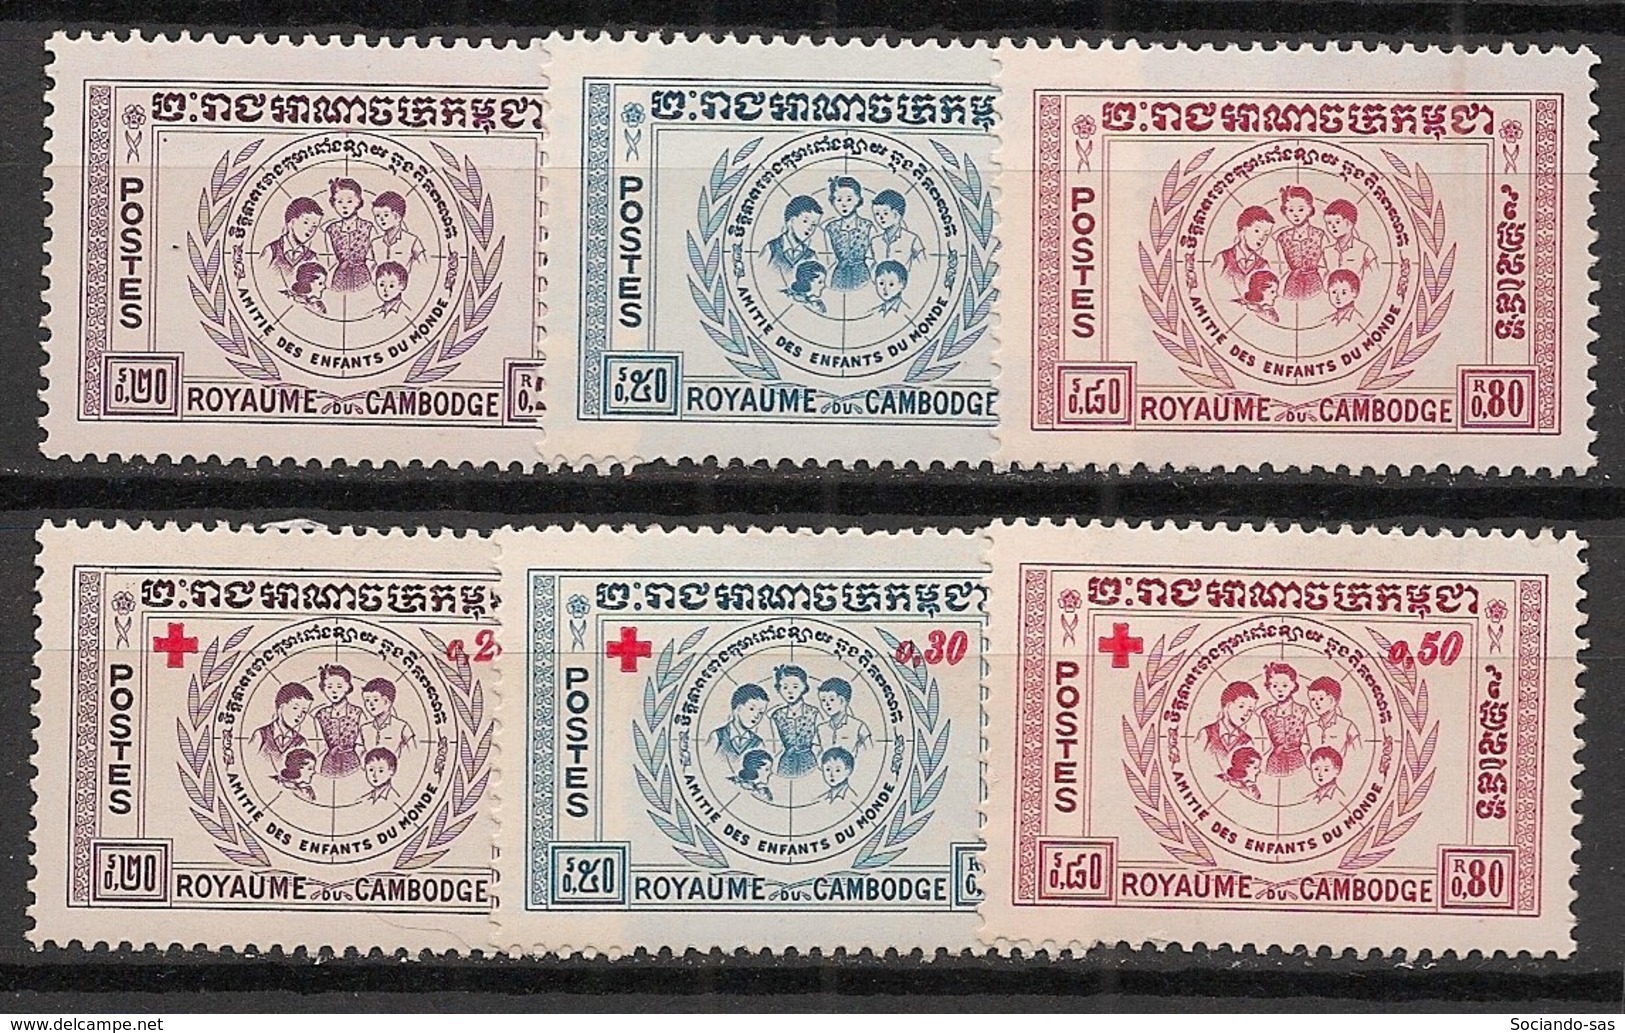 Cambodge - 1959 - N°Yv. 78 à 83 - Série Complète - Neuf Luxe ** / MNH / Postfrisch - Cambodge